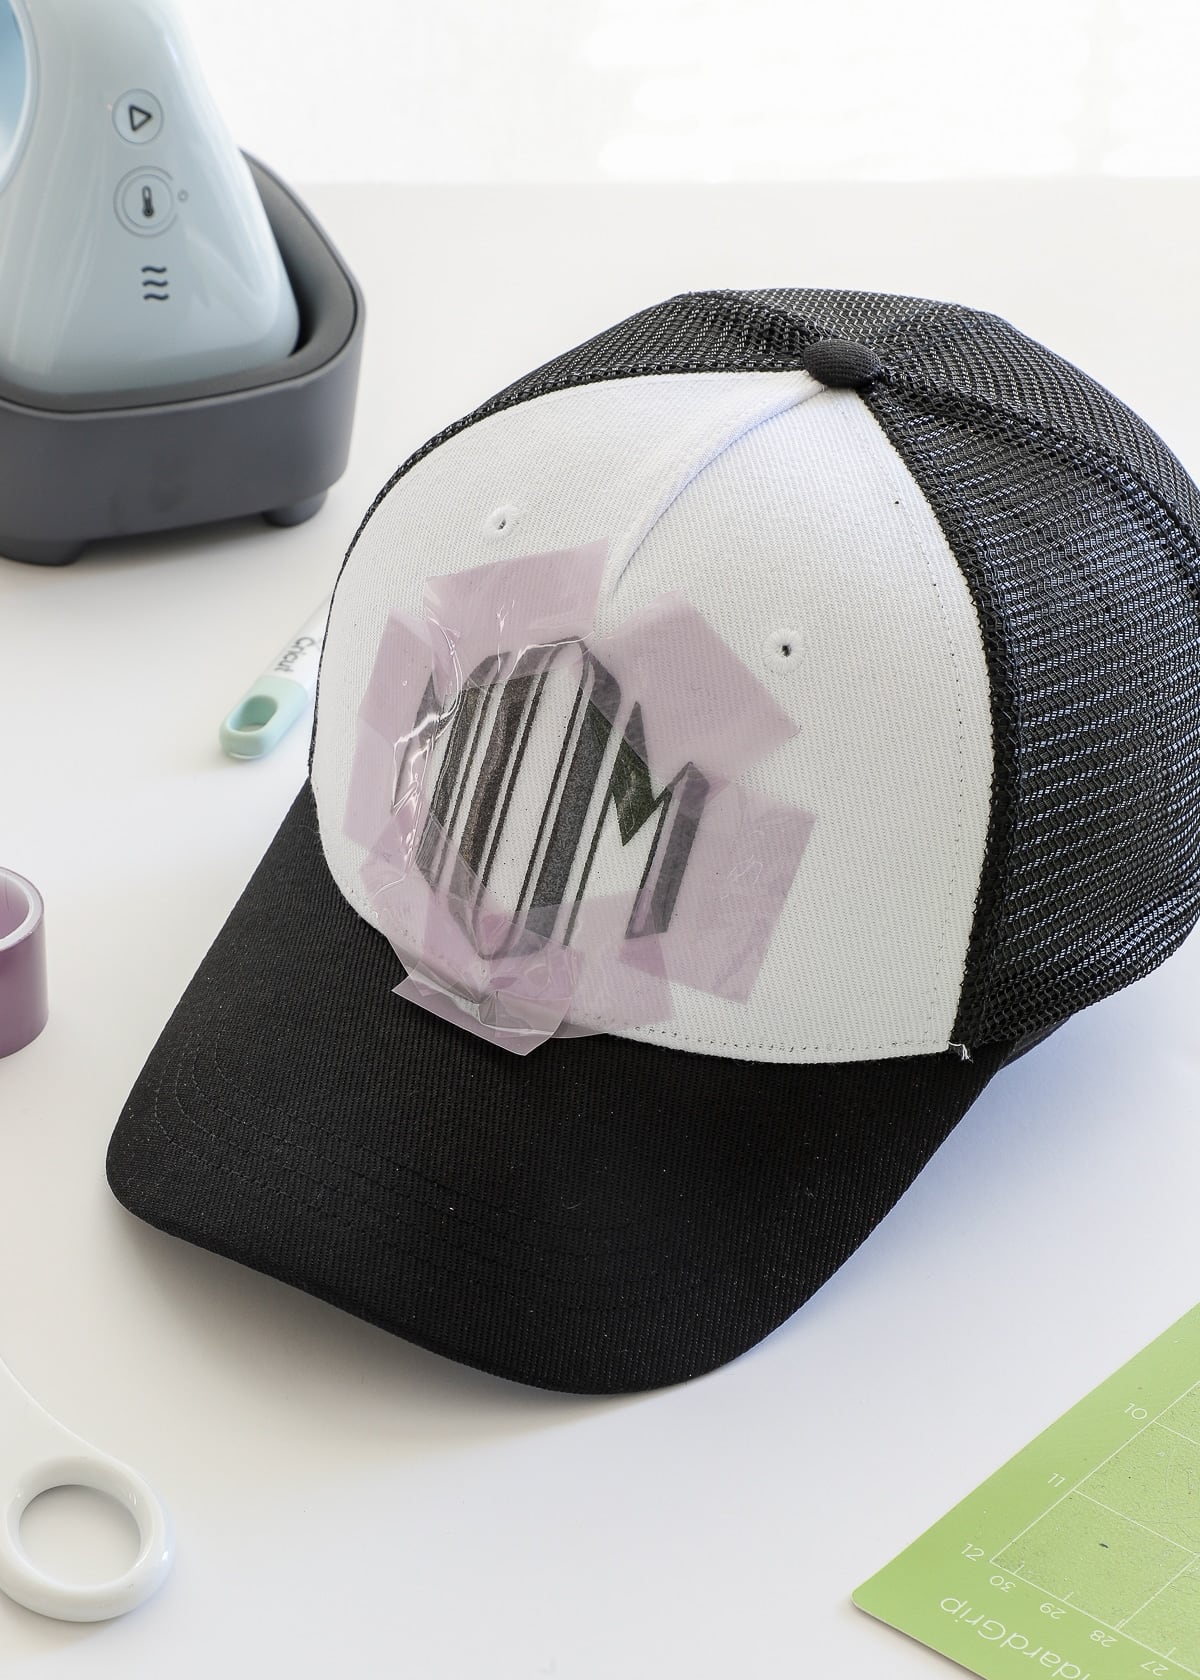 All About Cricut Hat Press  Unboxing, Review & FAQs - The Homes I